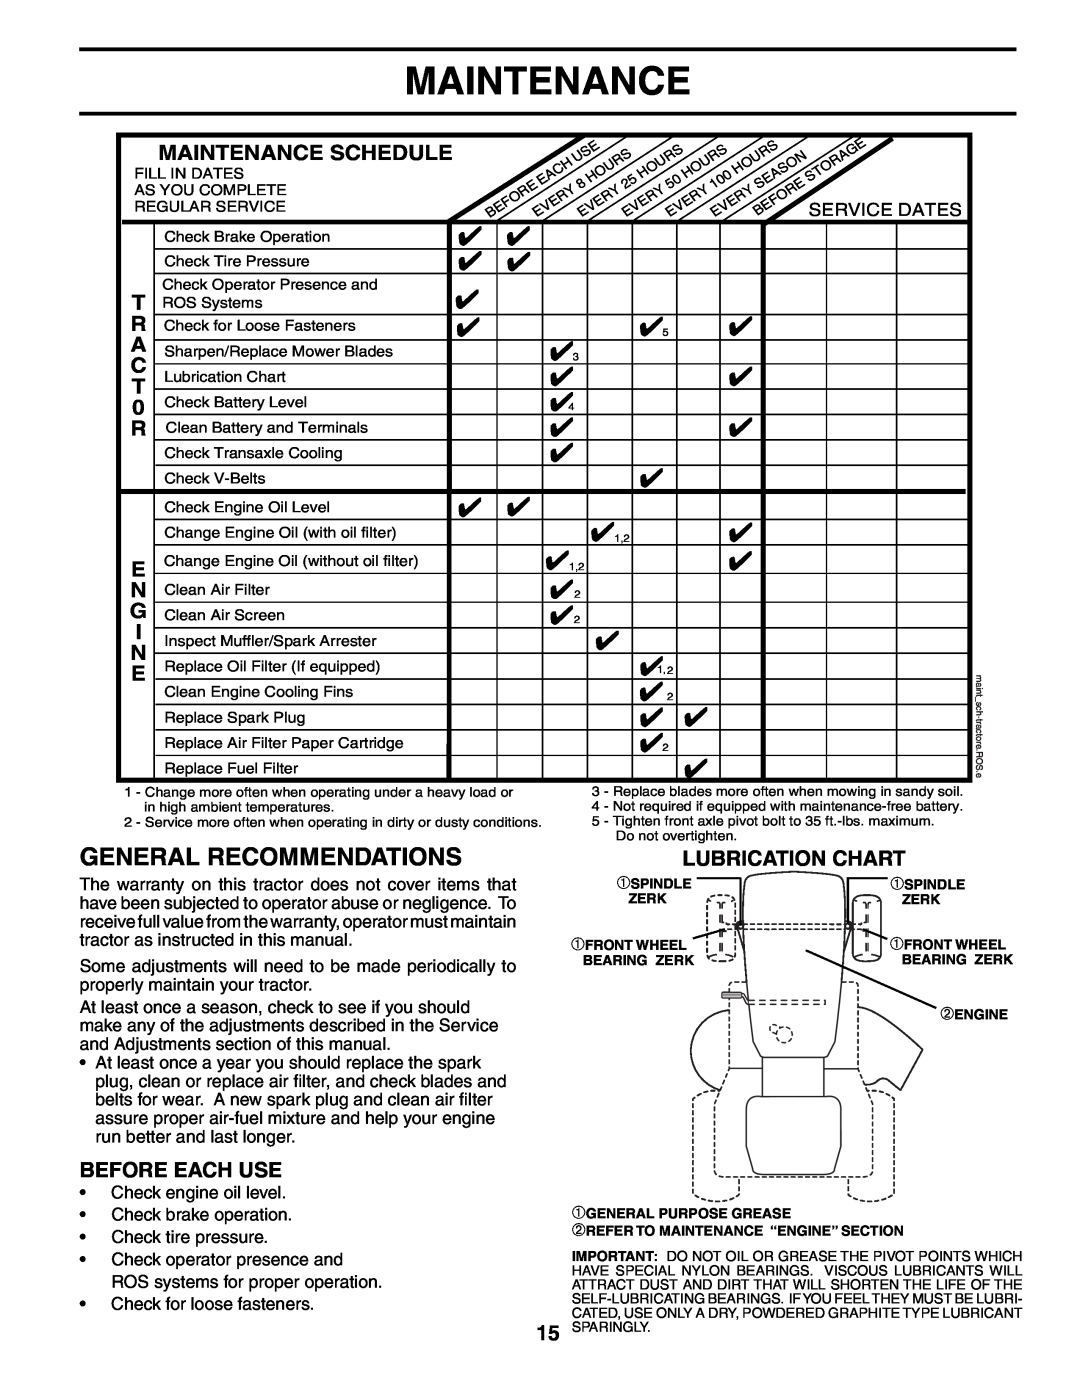 Poulan PK19H42YT manual General Recommendations, Lubrication Chart, Before Each Use, Maintenance Schedule 